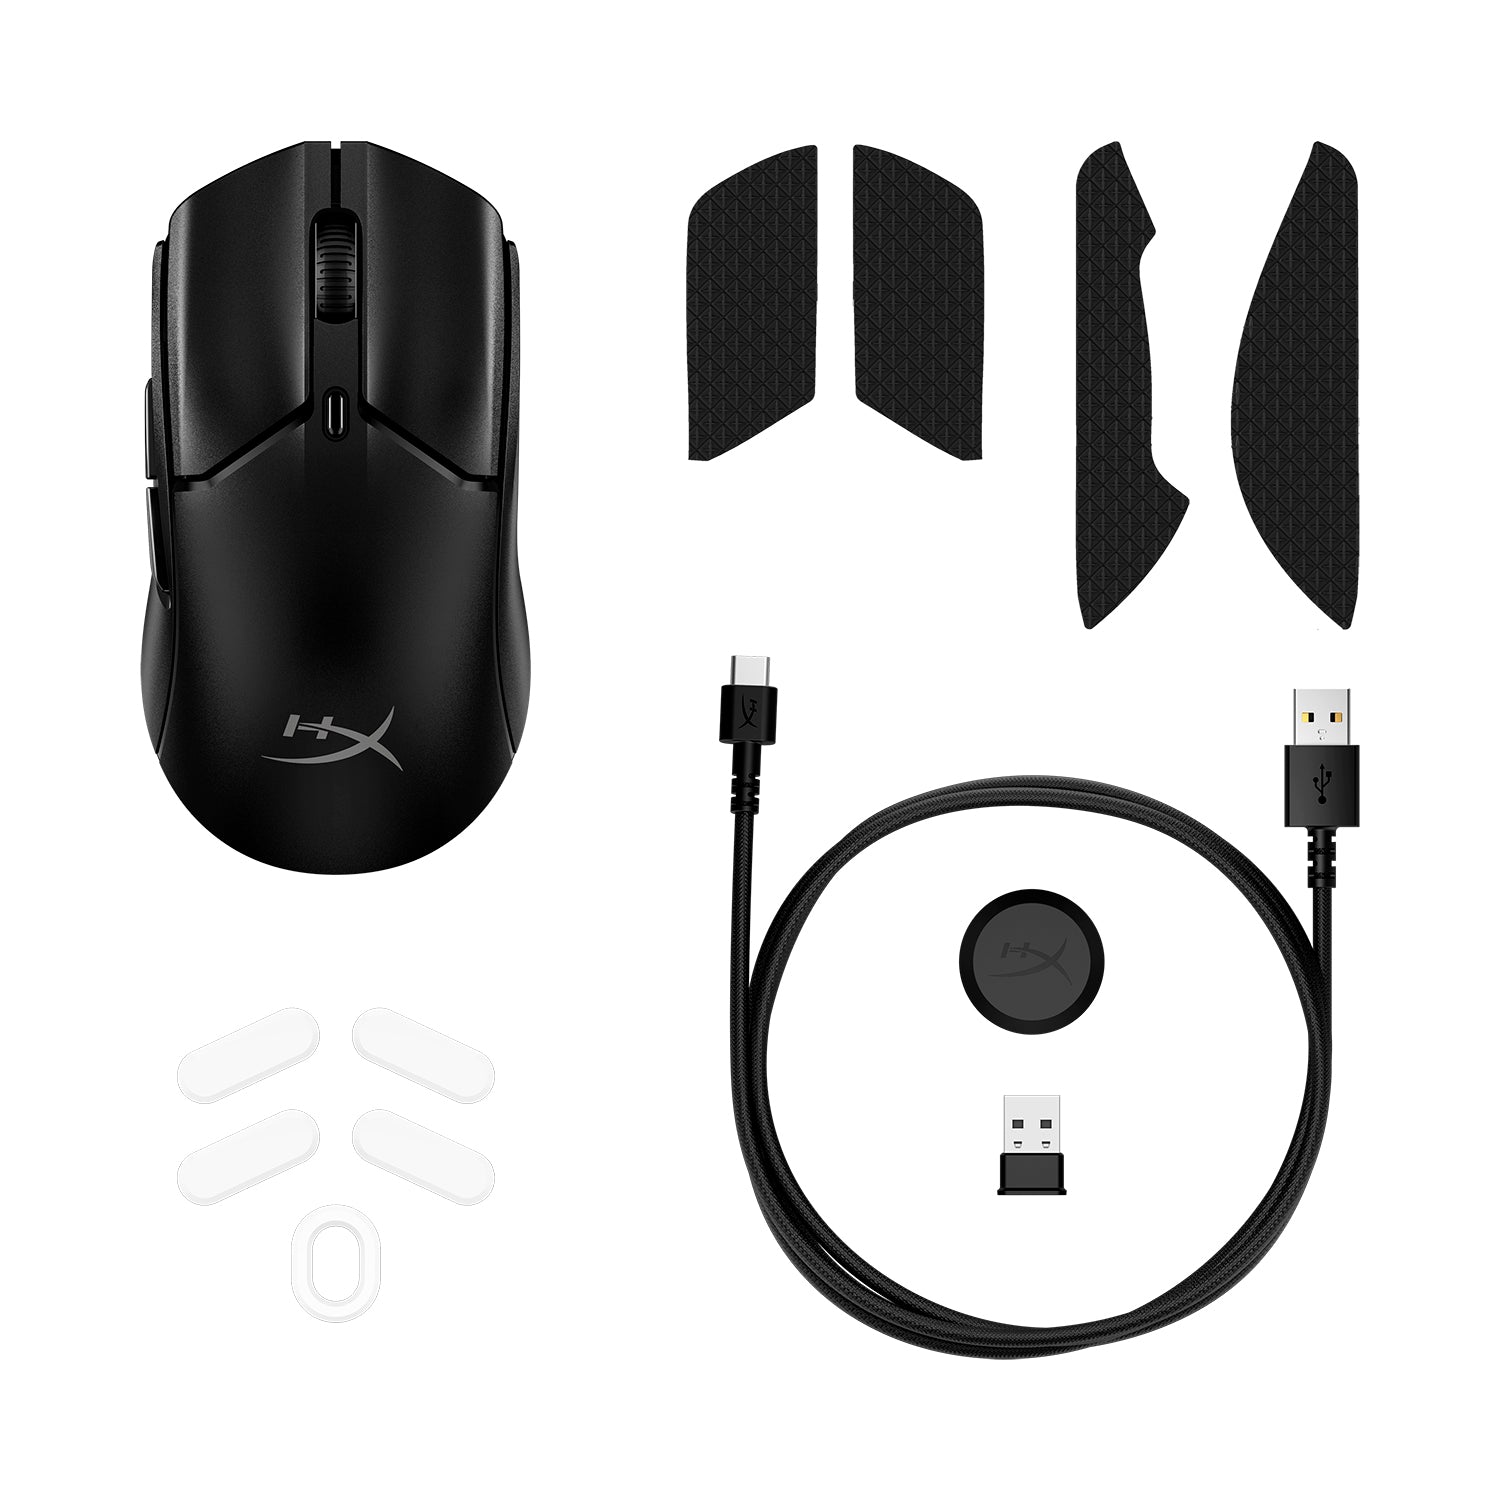 HyperX Pulsefire Haste 2 Mini Wireless Black Gaming Mouse - view from above showing accessories